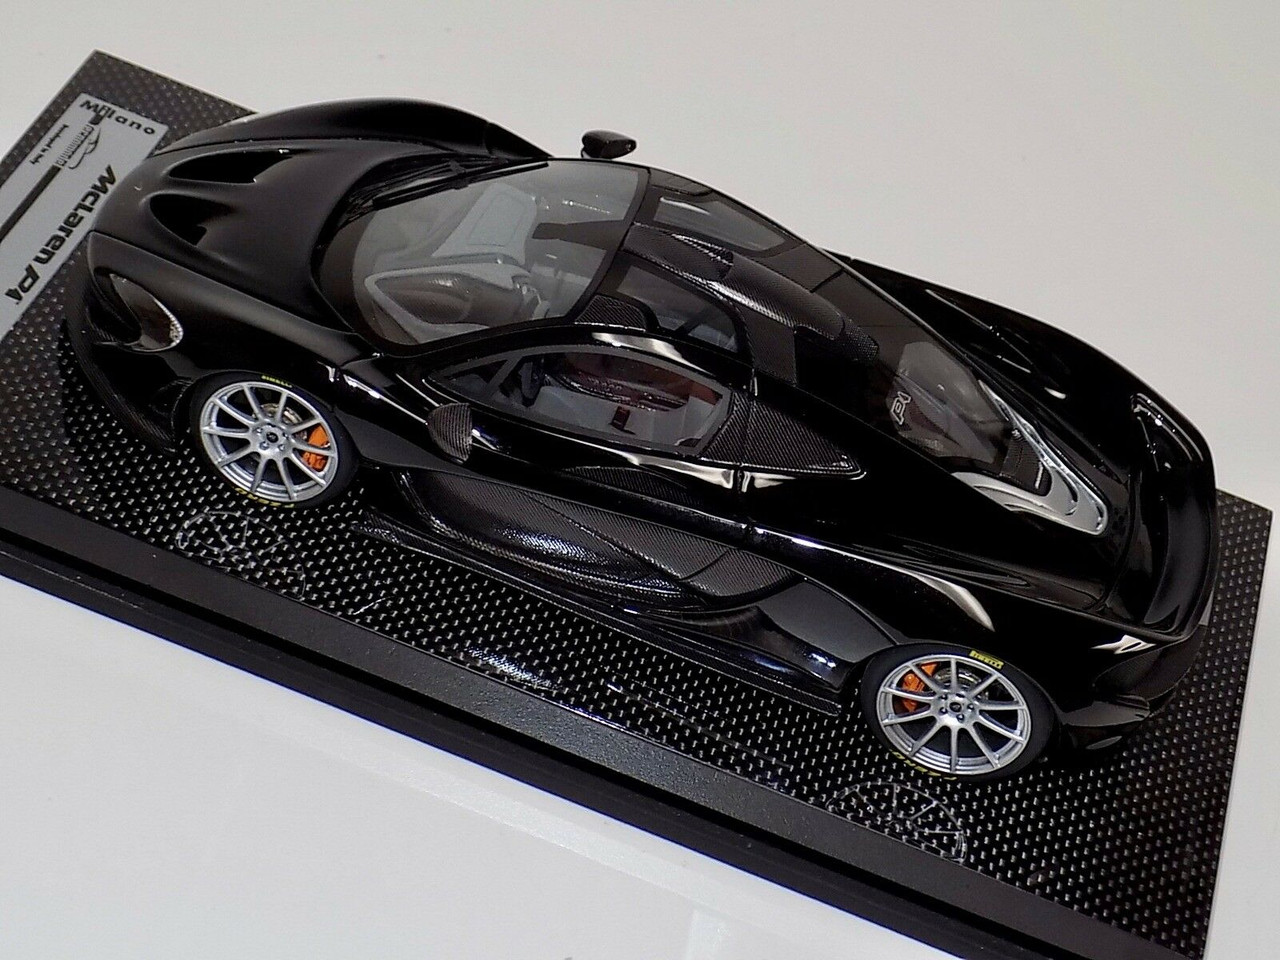 1/18 Tecnomodel McLaren P1 (Gloss Black with Silver wheels) with Carbon Base Resin Car Model Limited 01/25